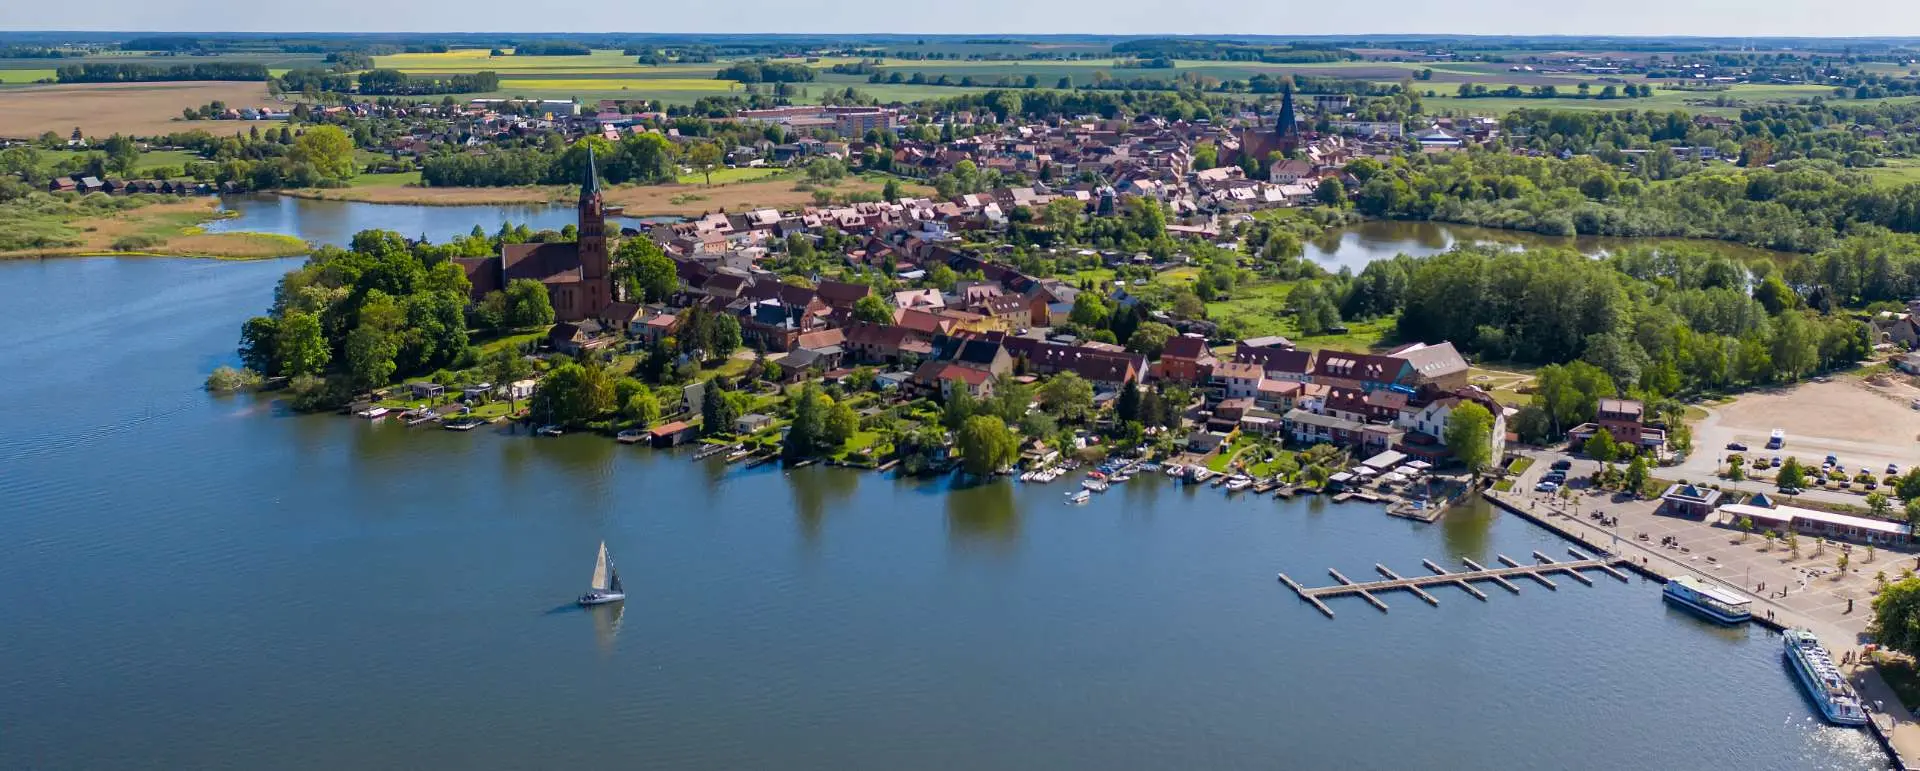 Müritz - the destination with disabled-friendly accommodations